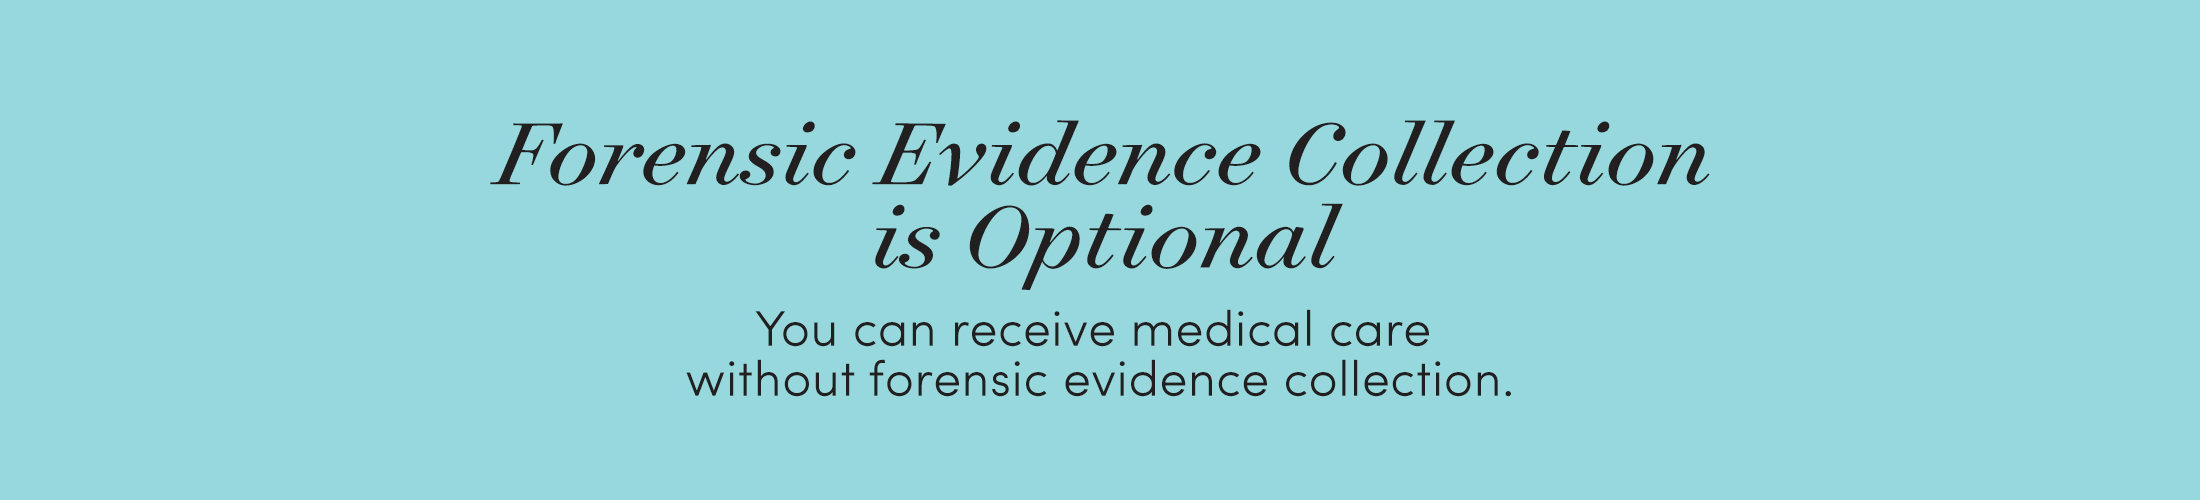 Forensic Evidence Collection is Optional You can recive medical care without forensic evidence collection.